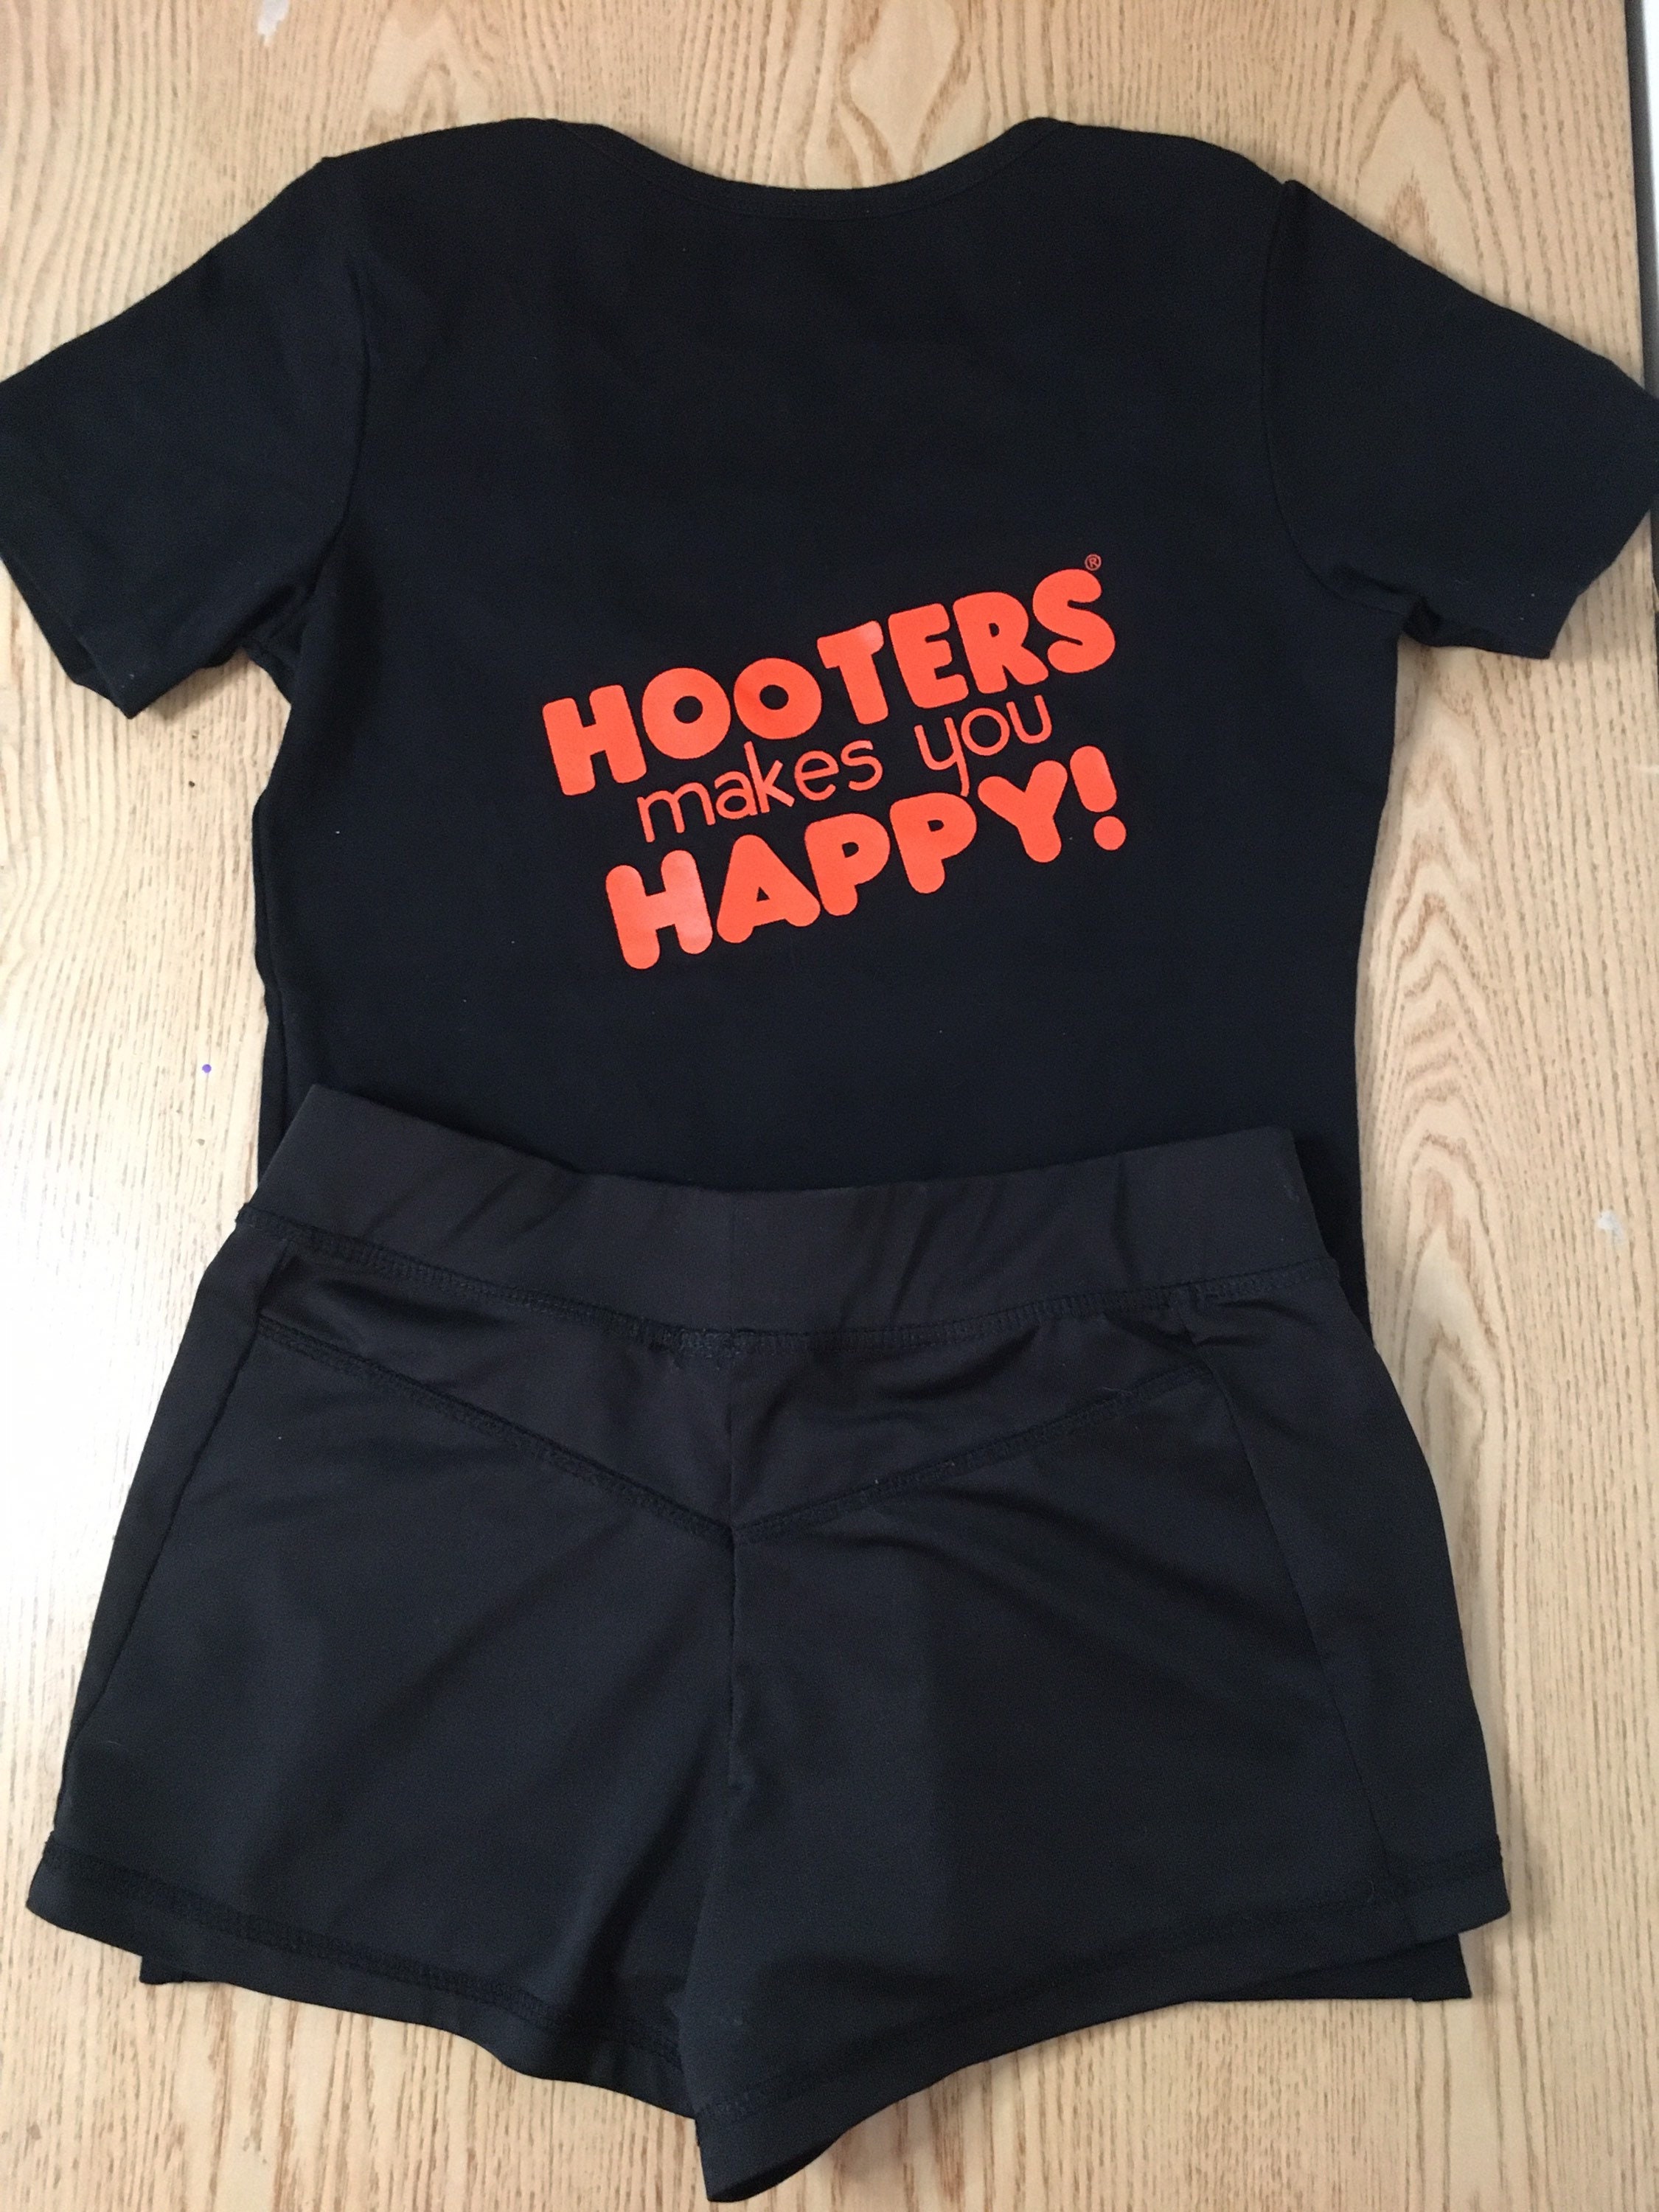 Discover Bin 1 #6 Hooters Girl Worn Super Sexy Uniform Short Sleeve V-neck Tee and Shorts Outfit With Glow in the Dark Skeleton Necklace Size XSmall